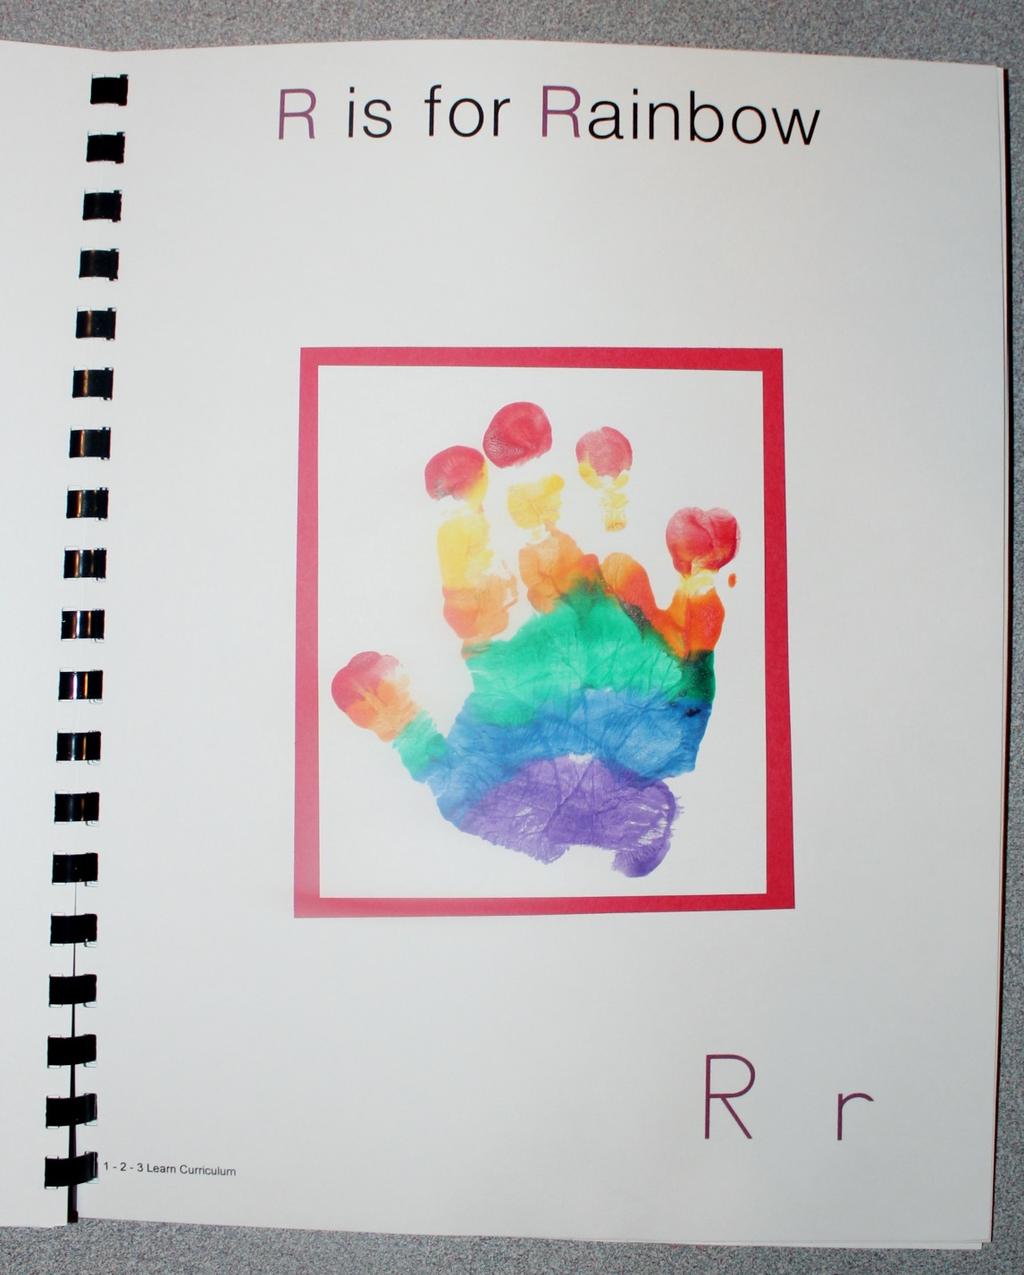 R is for Rainbow You will be painting the child s hand in 6 different colors. Red, yellow, orange, green, blue and purple.